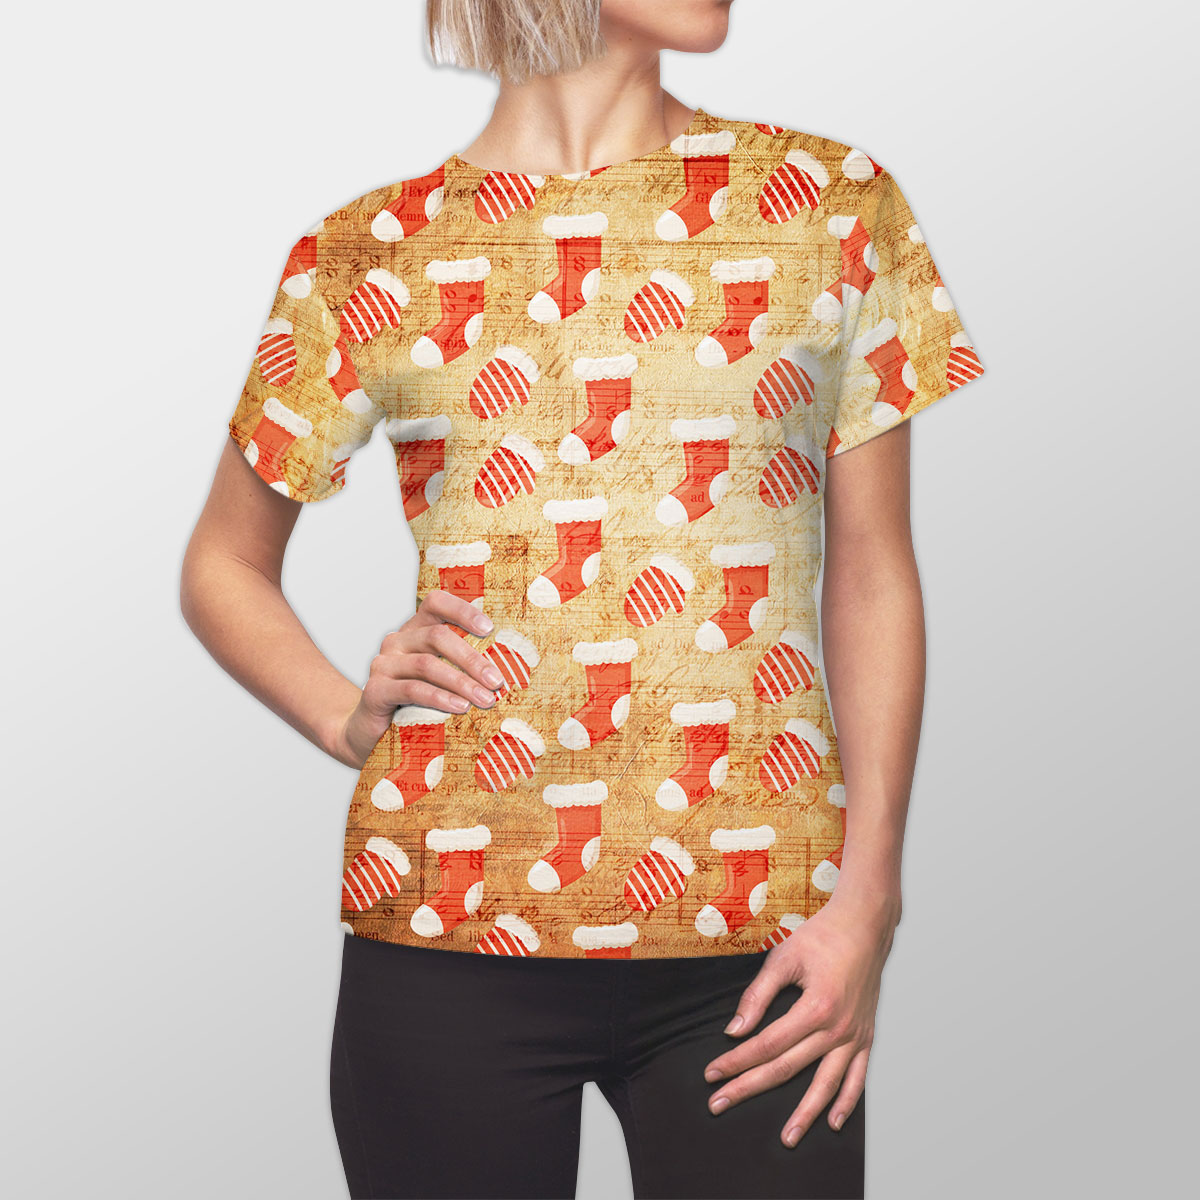 Red Socks And Christmas Oven Mitts Women Cut Sew Tee